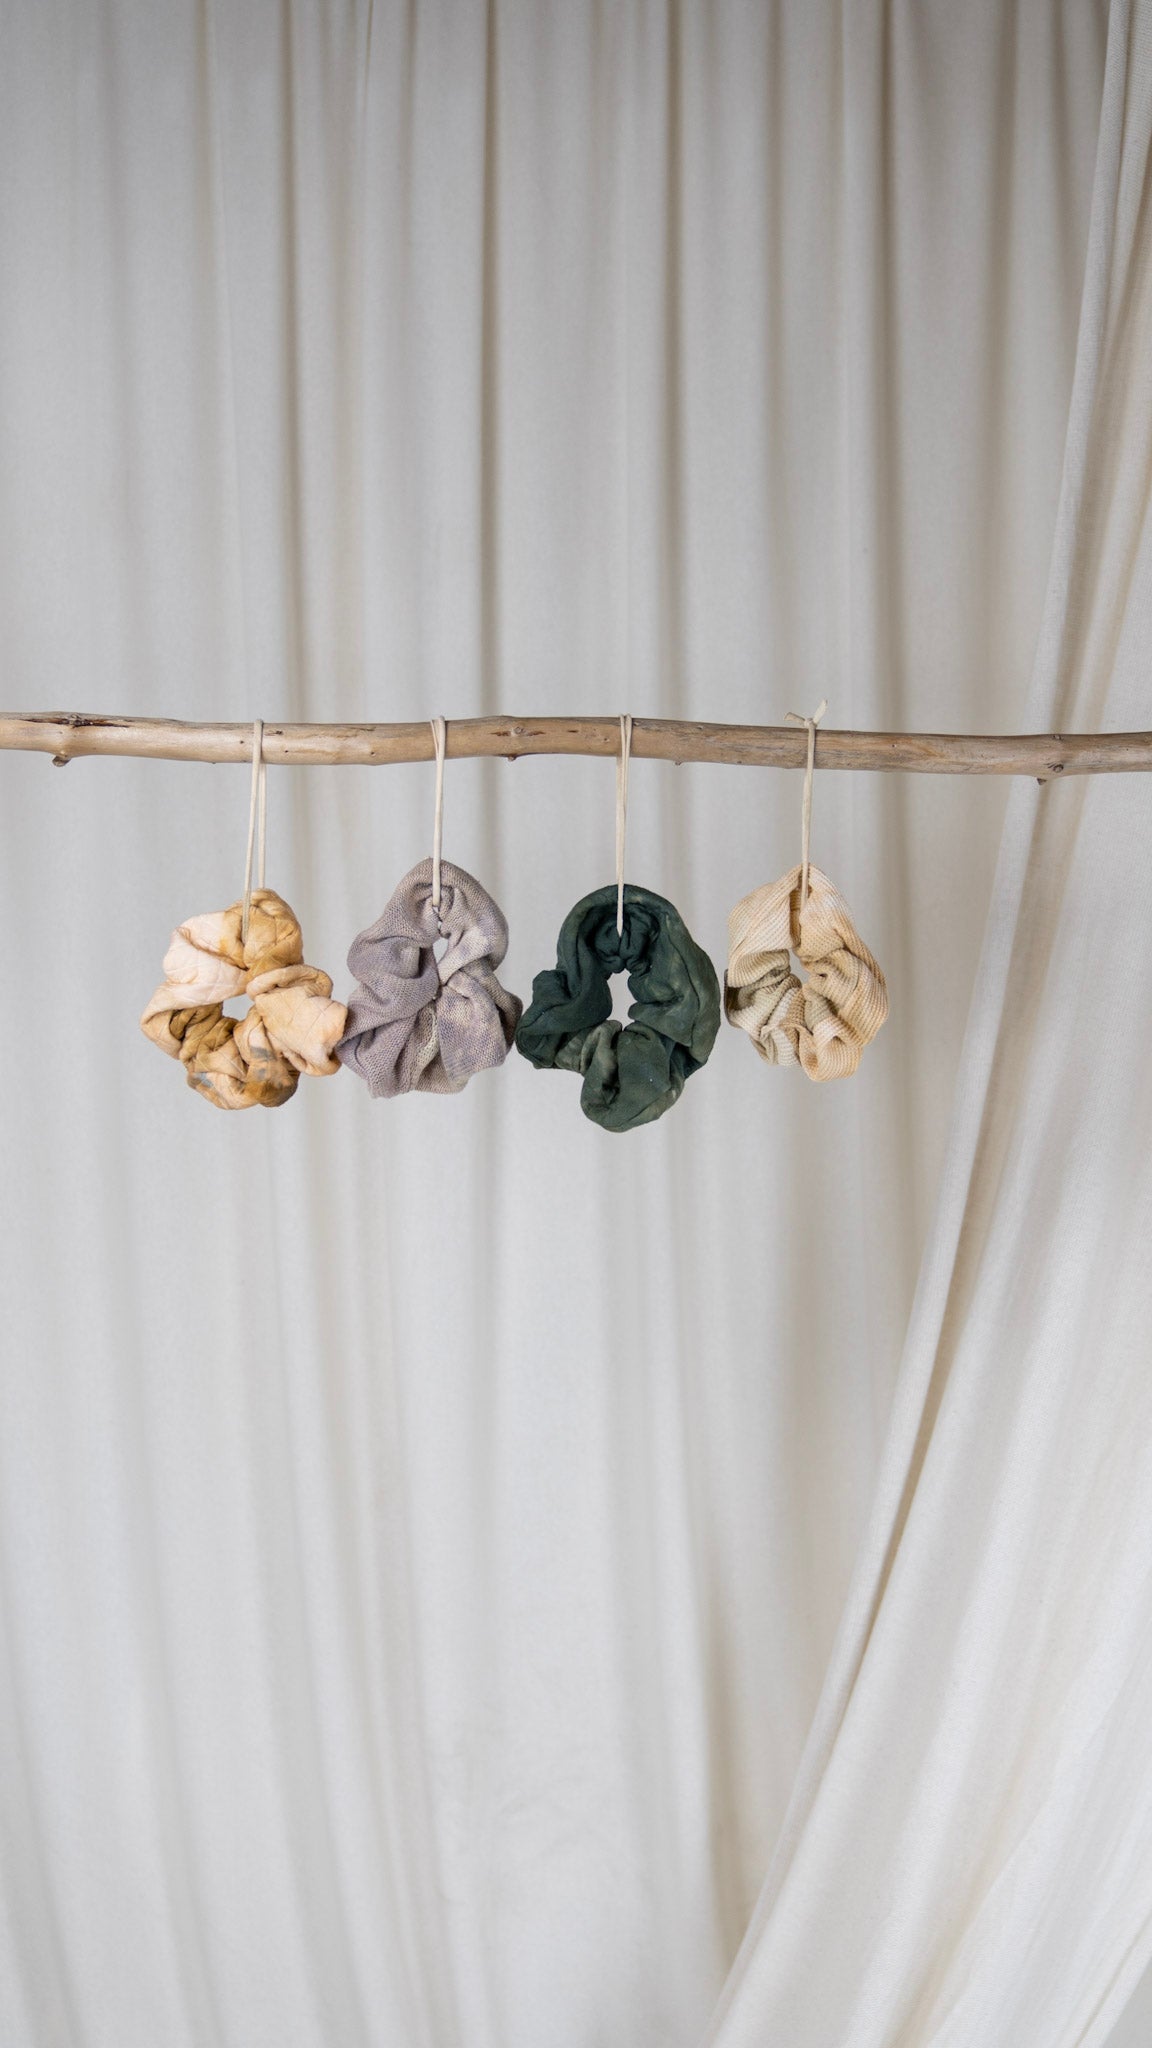 Several oversized scrunchies in various hues and fabrics hanging from a piece of driftwood